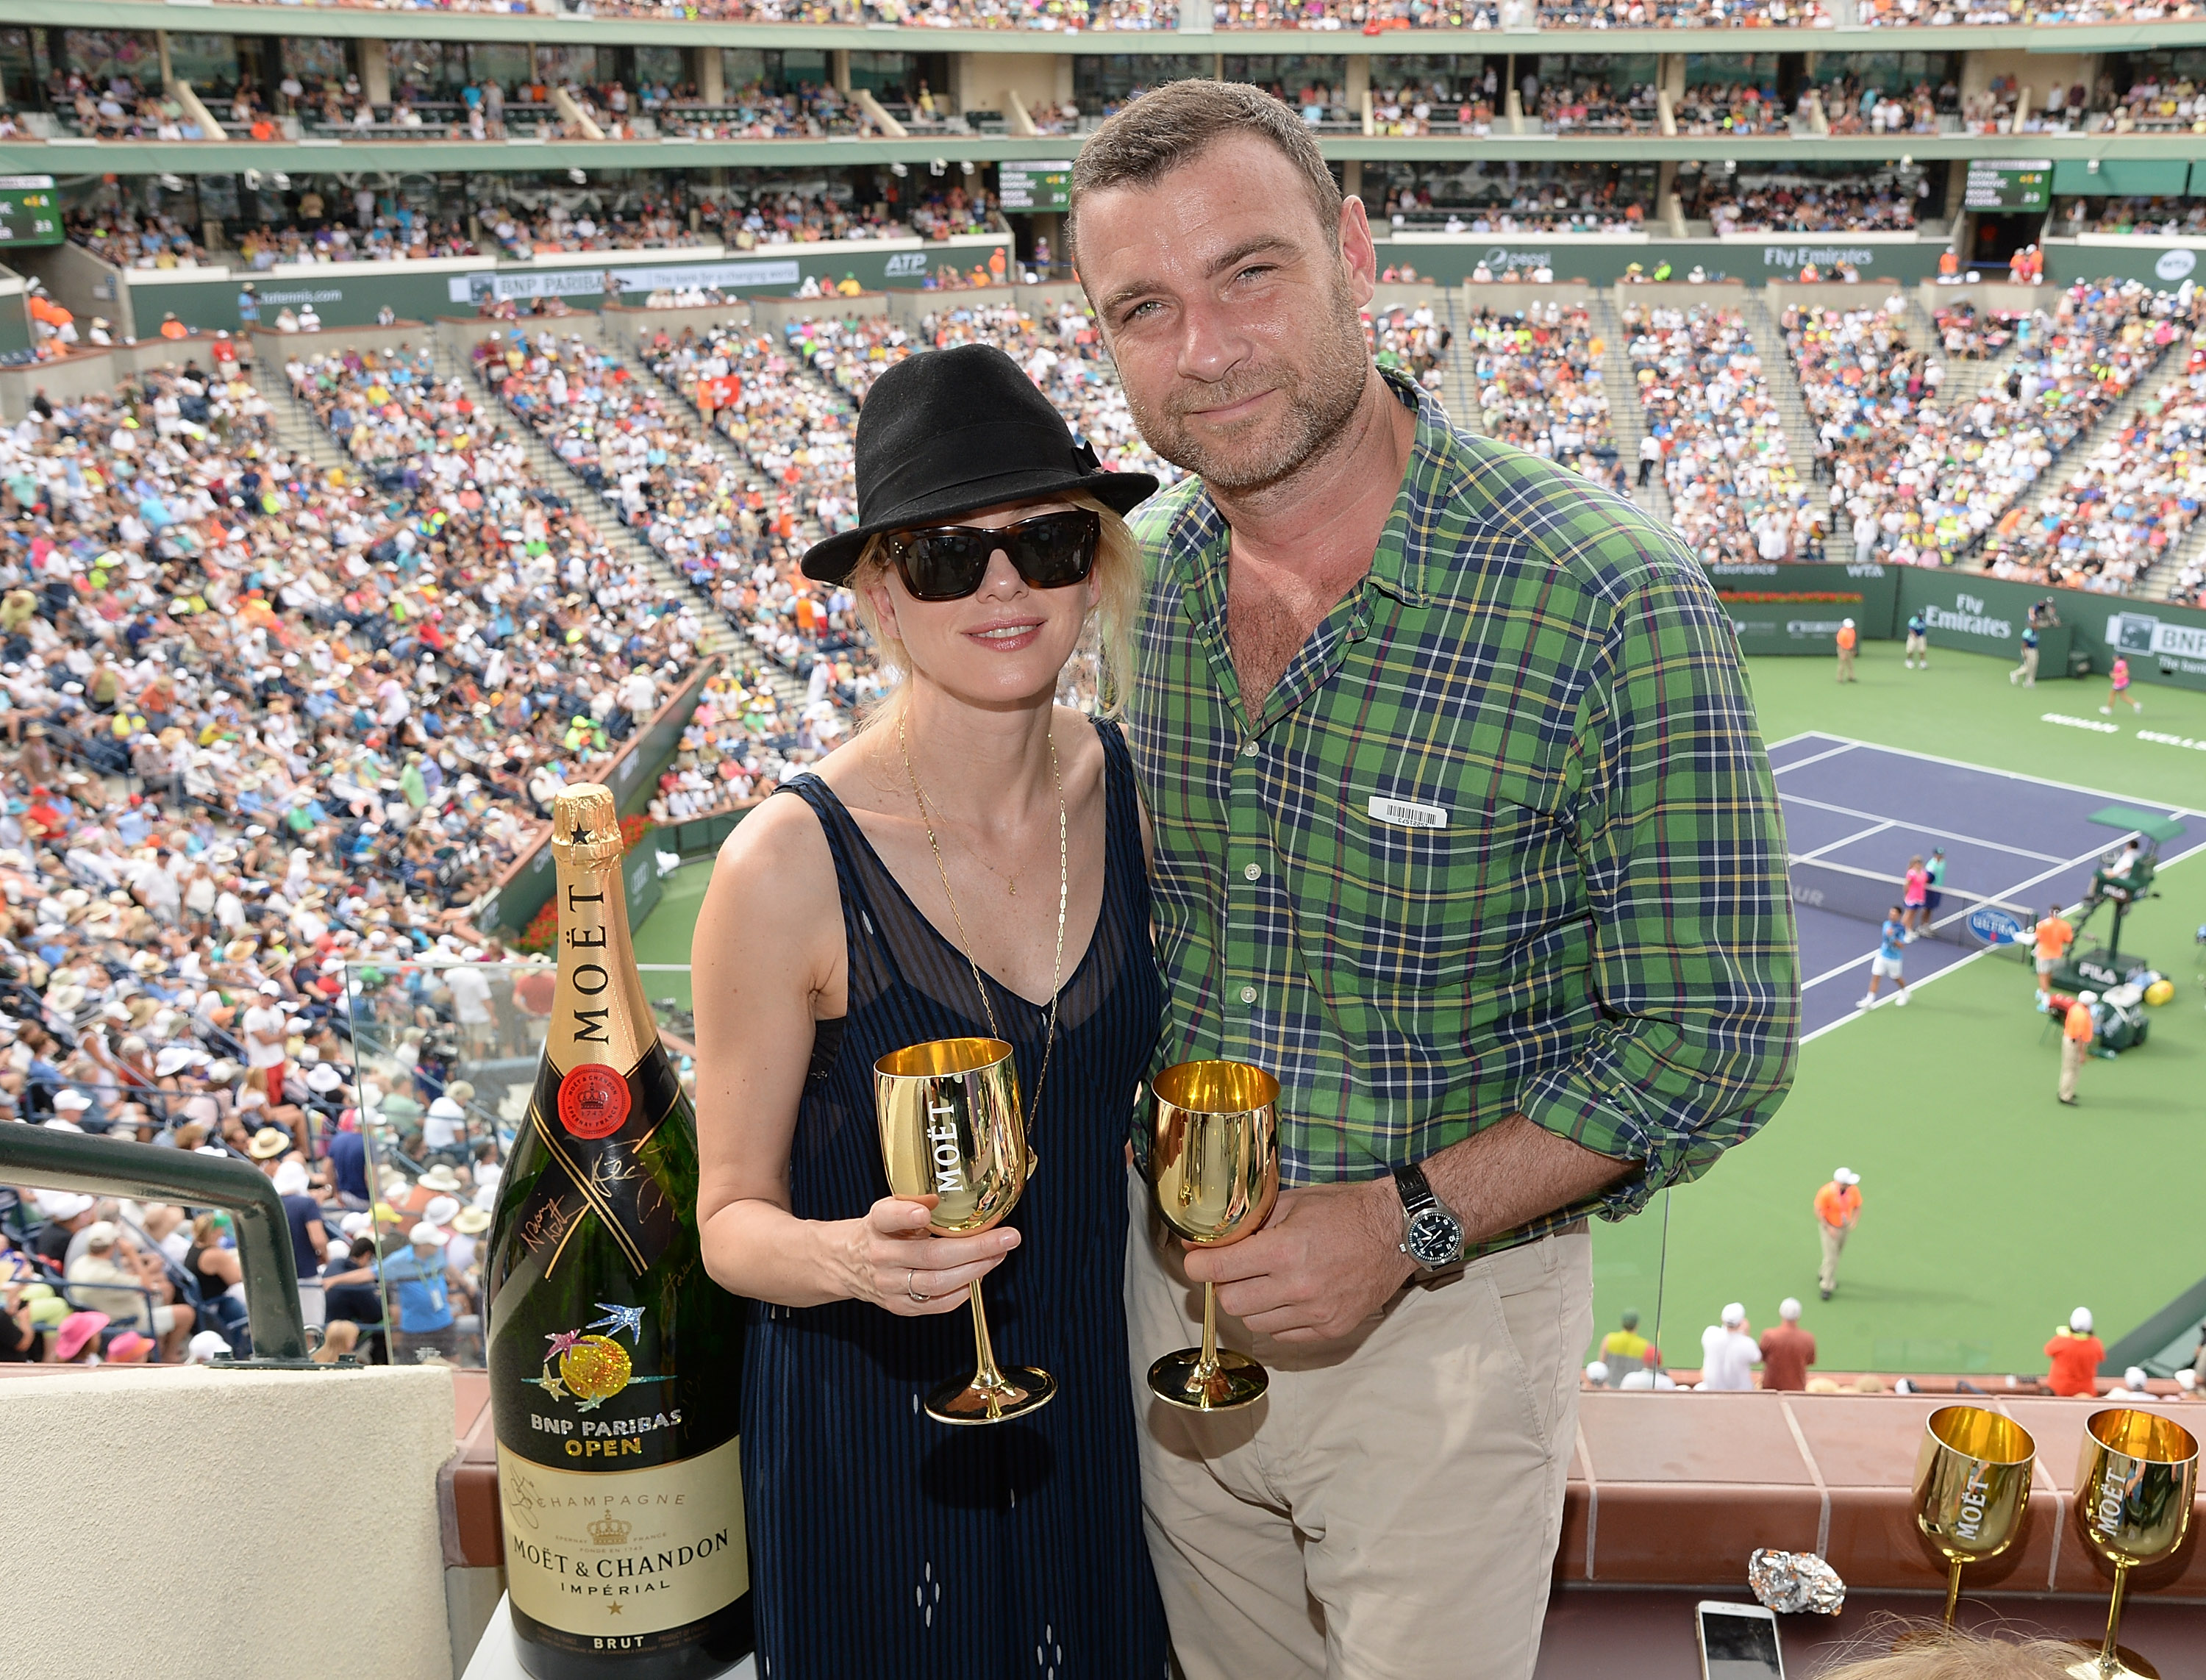 Actors Naomi Watts and Liev Schreiber visit The Moet and Chandon Suite at the 2015 BNP Paribas Open